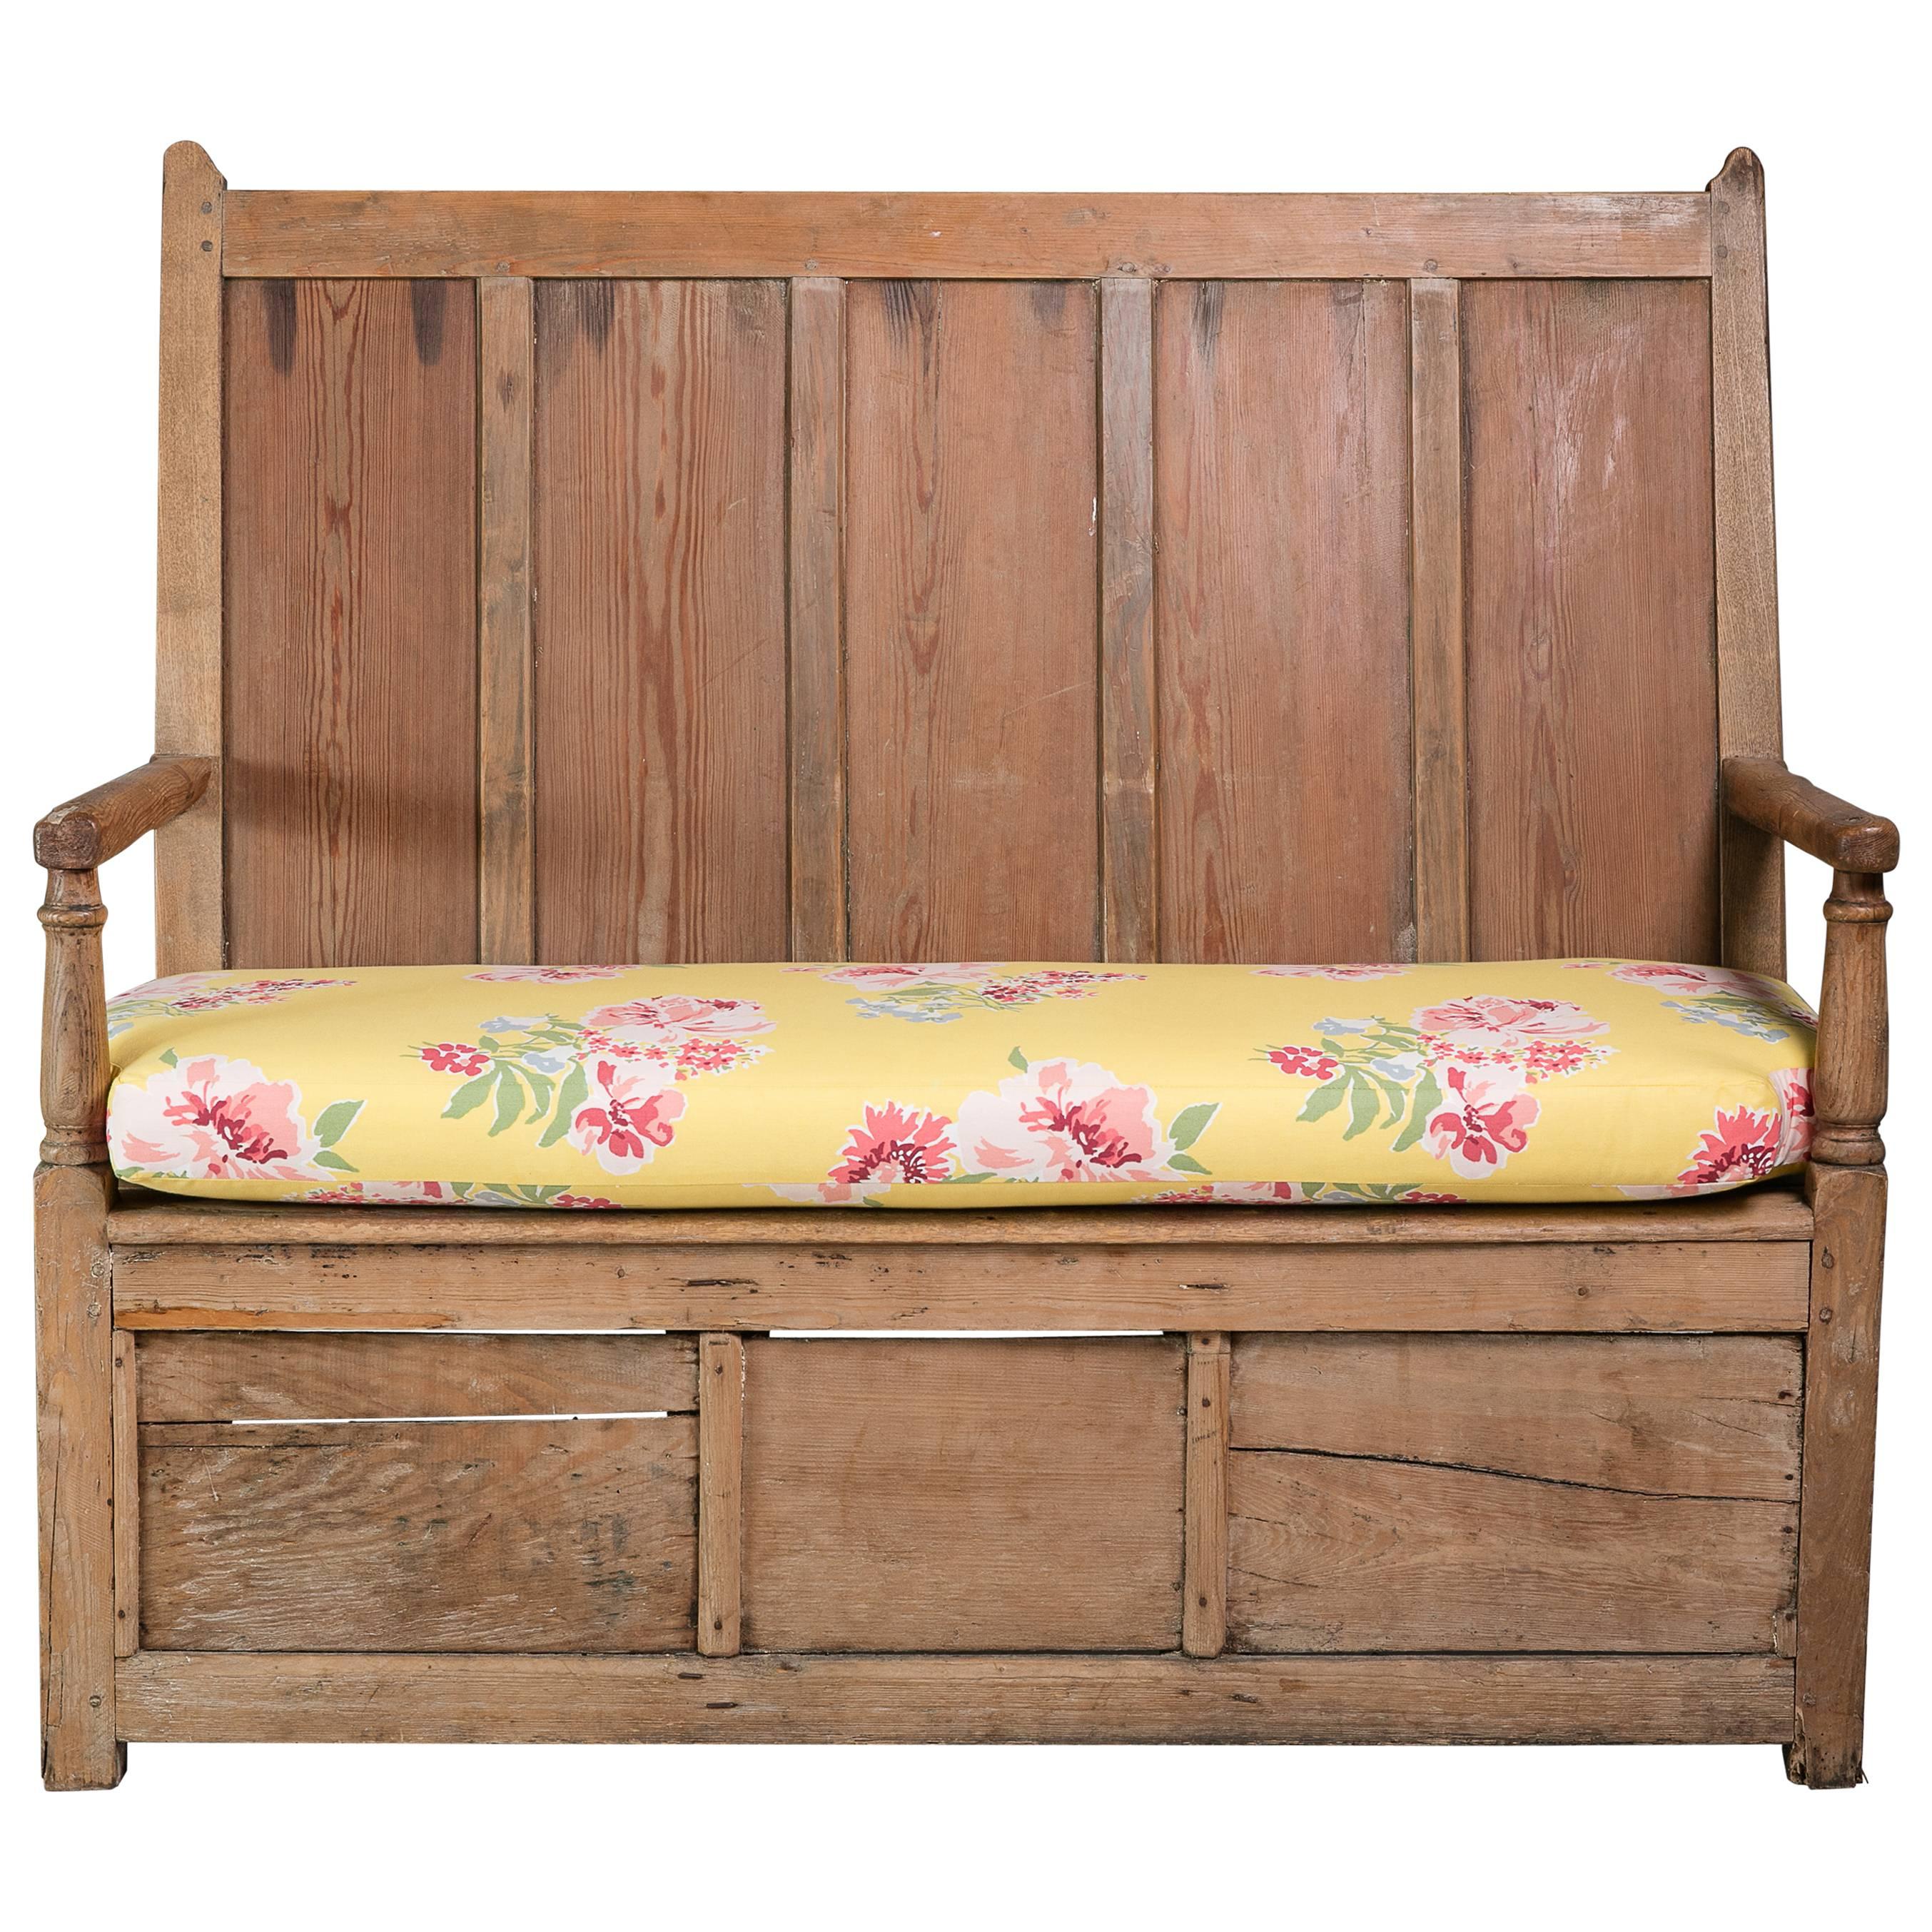 Pine Bench with Floral Cushion, 19th Century English  For Sale